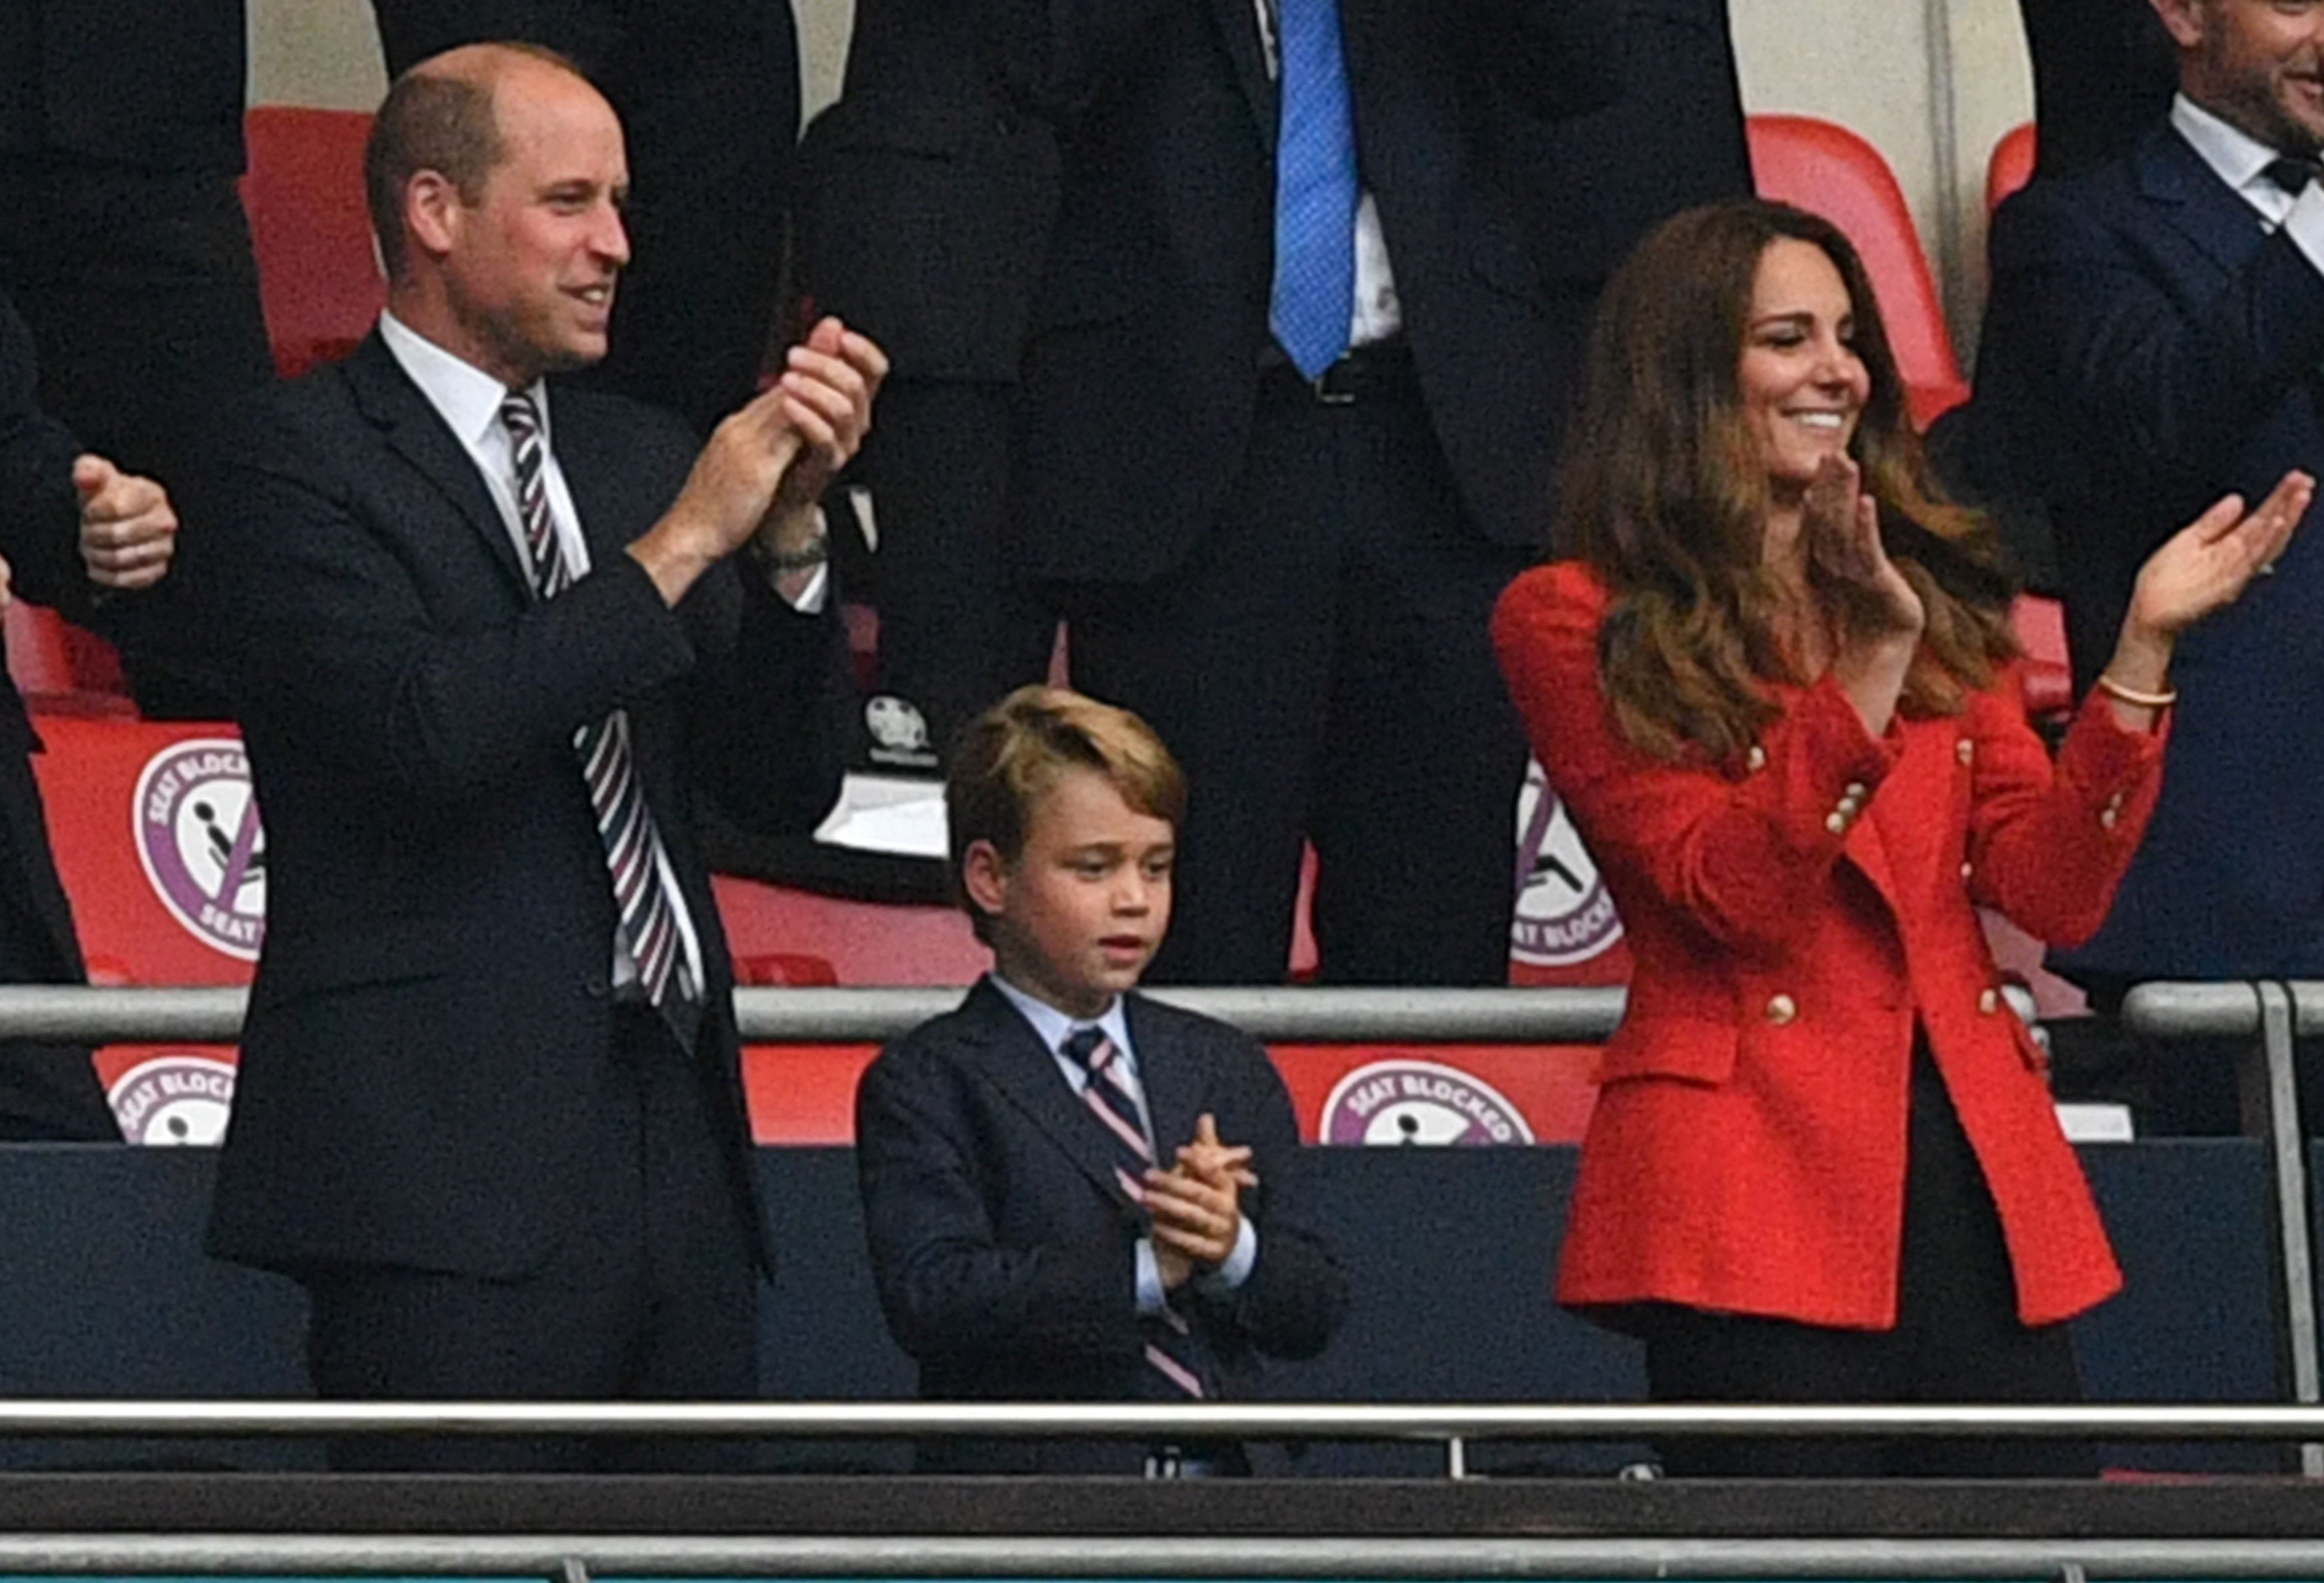 Prince William, Prince George, and Kate Middleton in the stands and clapping at the UEFA EURO football match between England and Germany